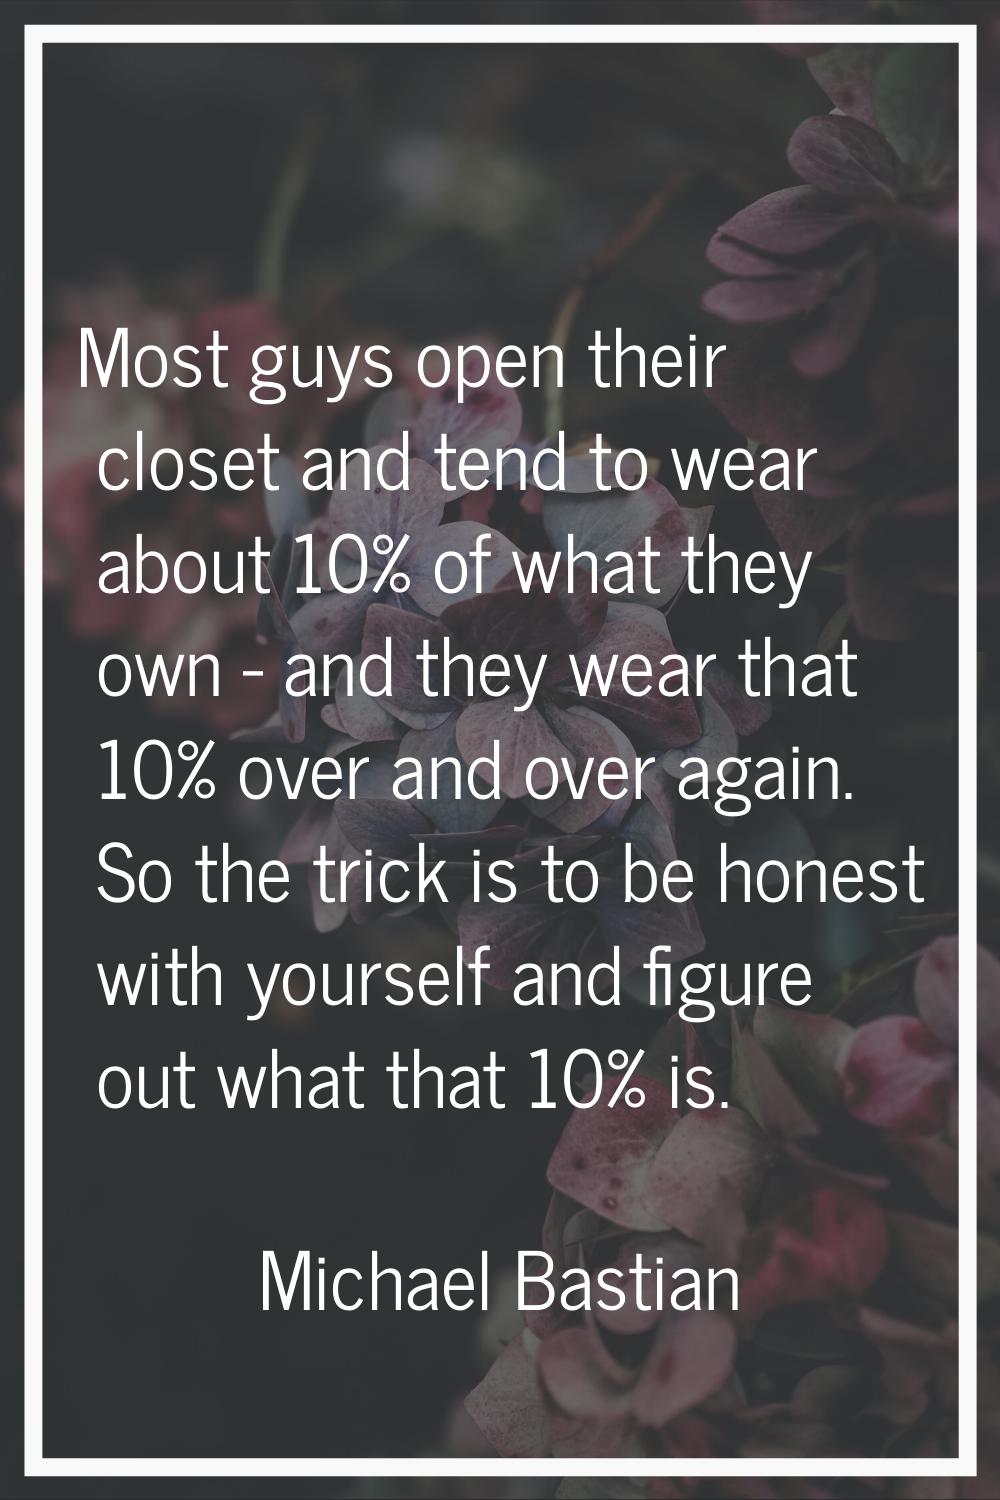 Most guys open their closet and tend to wear about 10% of what they own - and they wear that 10% ov